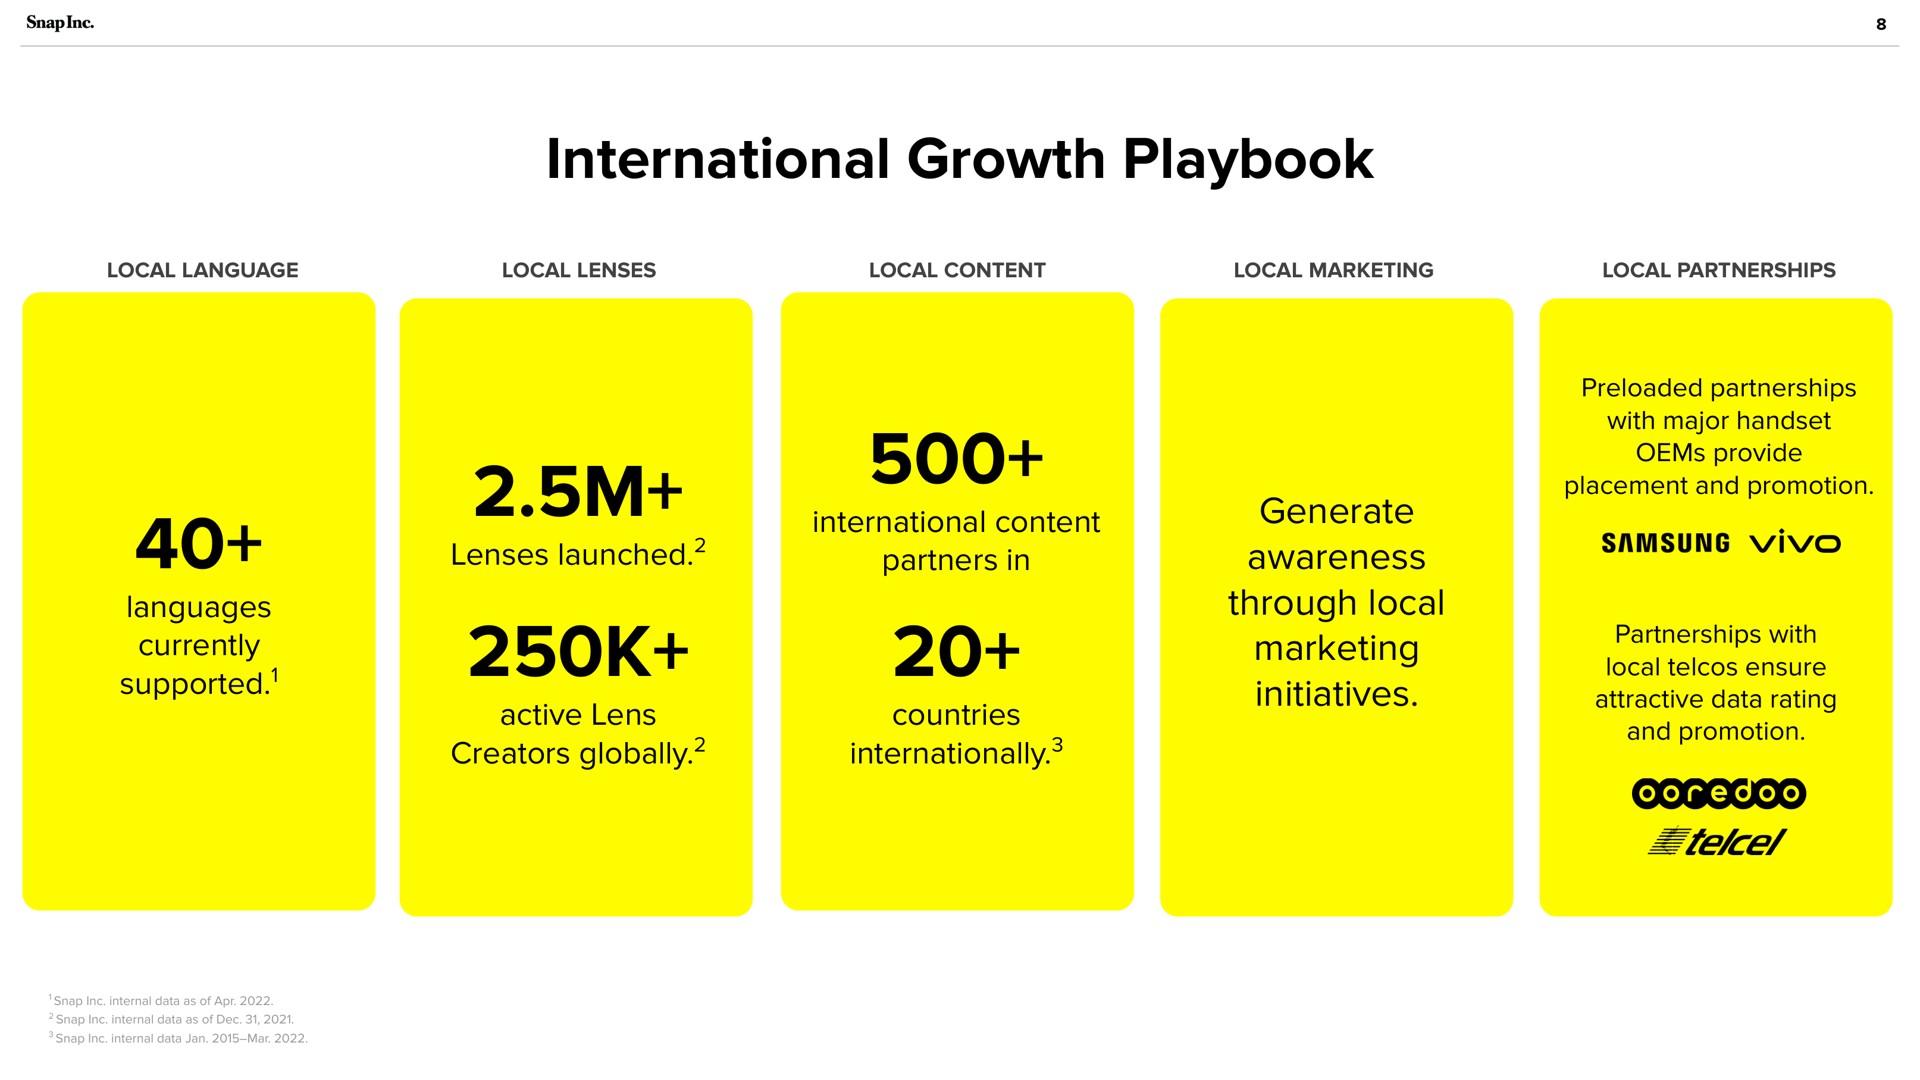 international growth playbook supported lenses launched creators globally internationally generate awareness through local marketing initiatives | Snap Inc